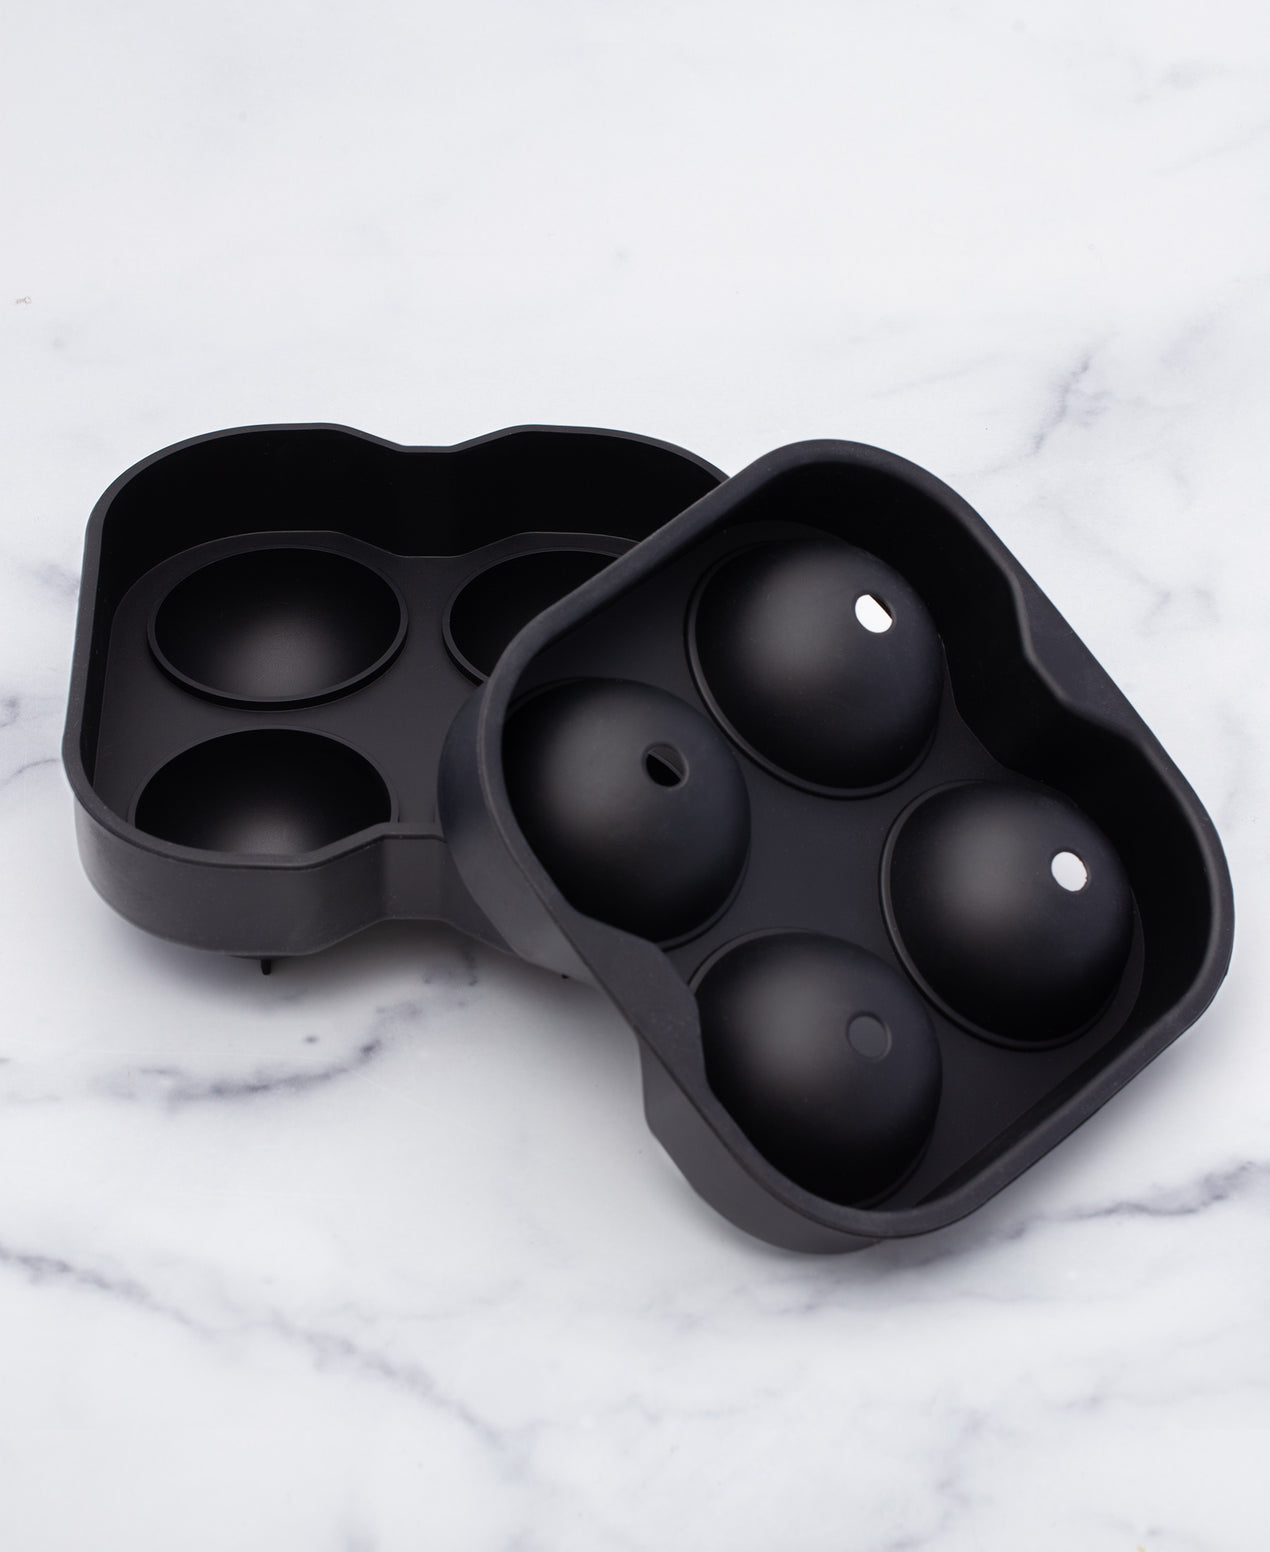 4-Sphere XL Black Silicone Ice Mold by Cambridge Home